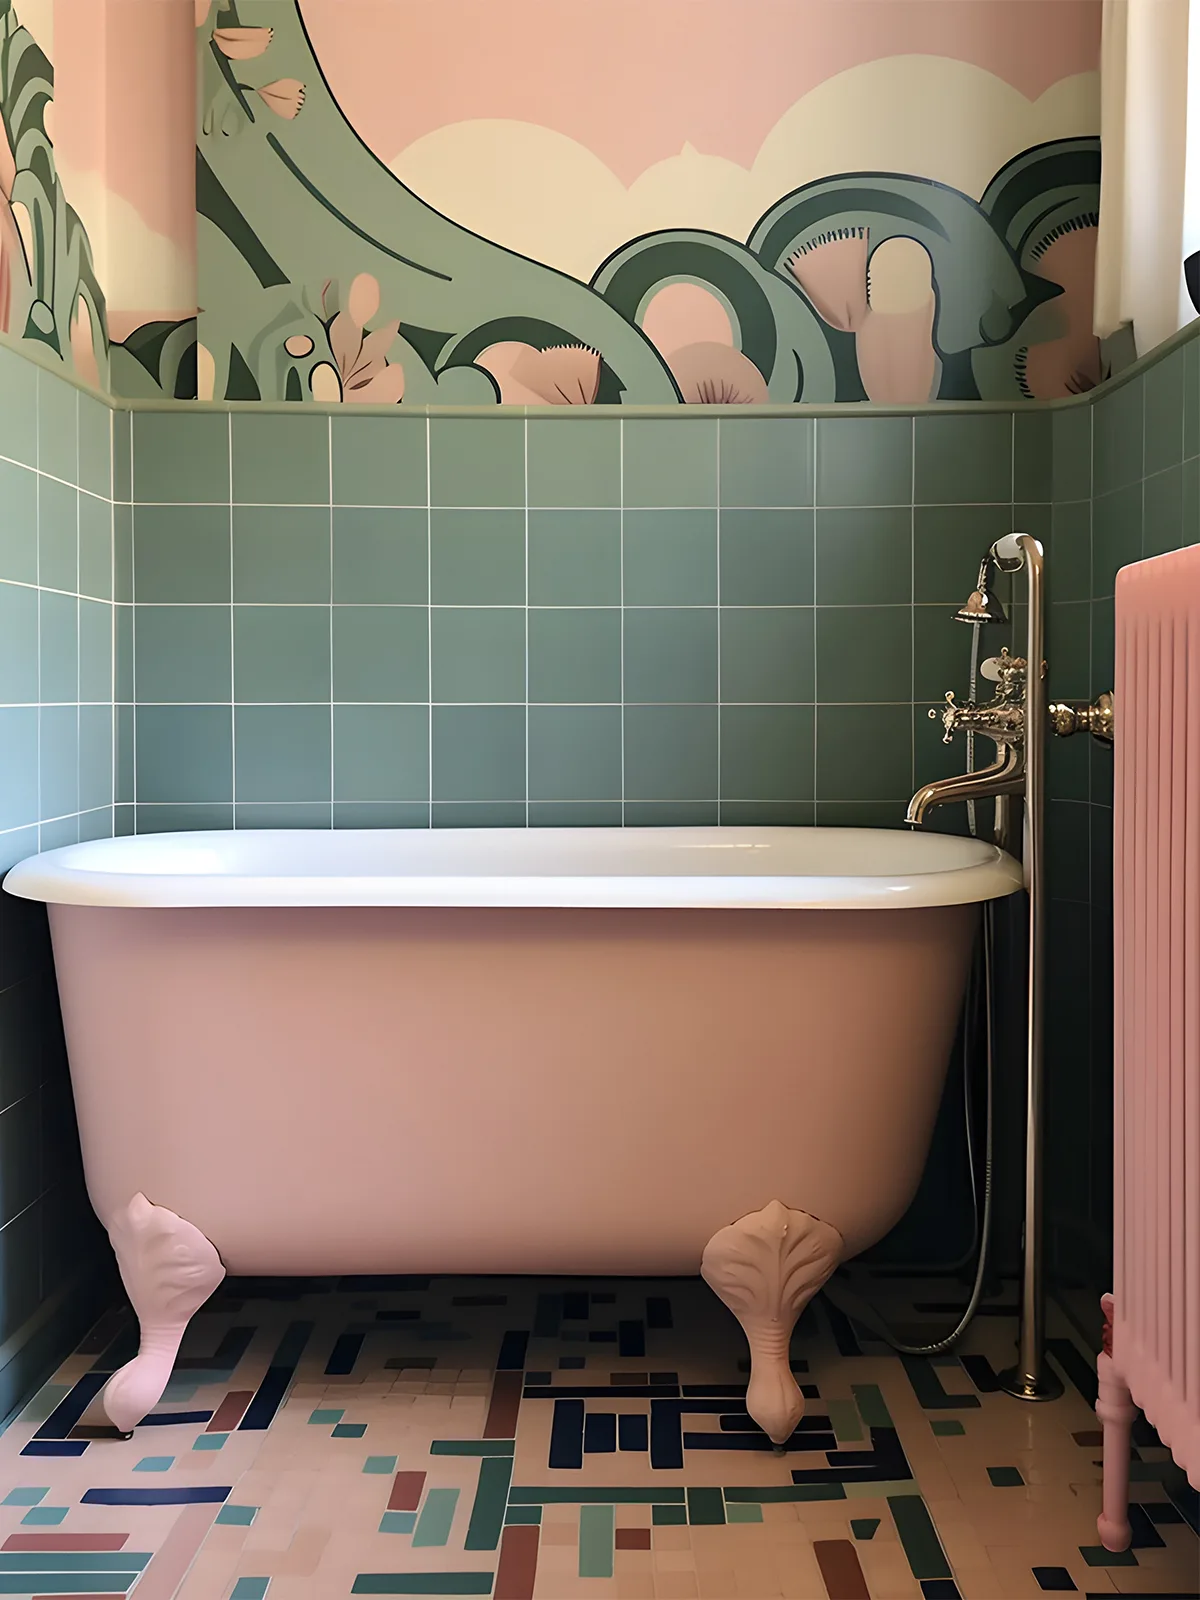 A bathroom with a pink tub and tiled walls.